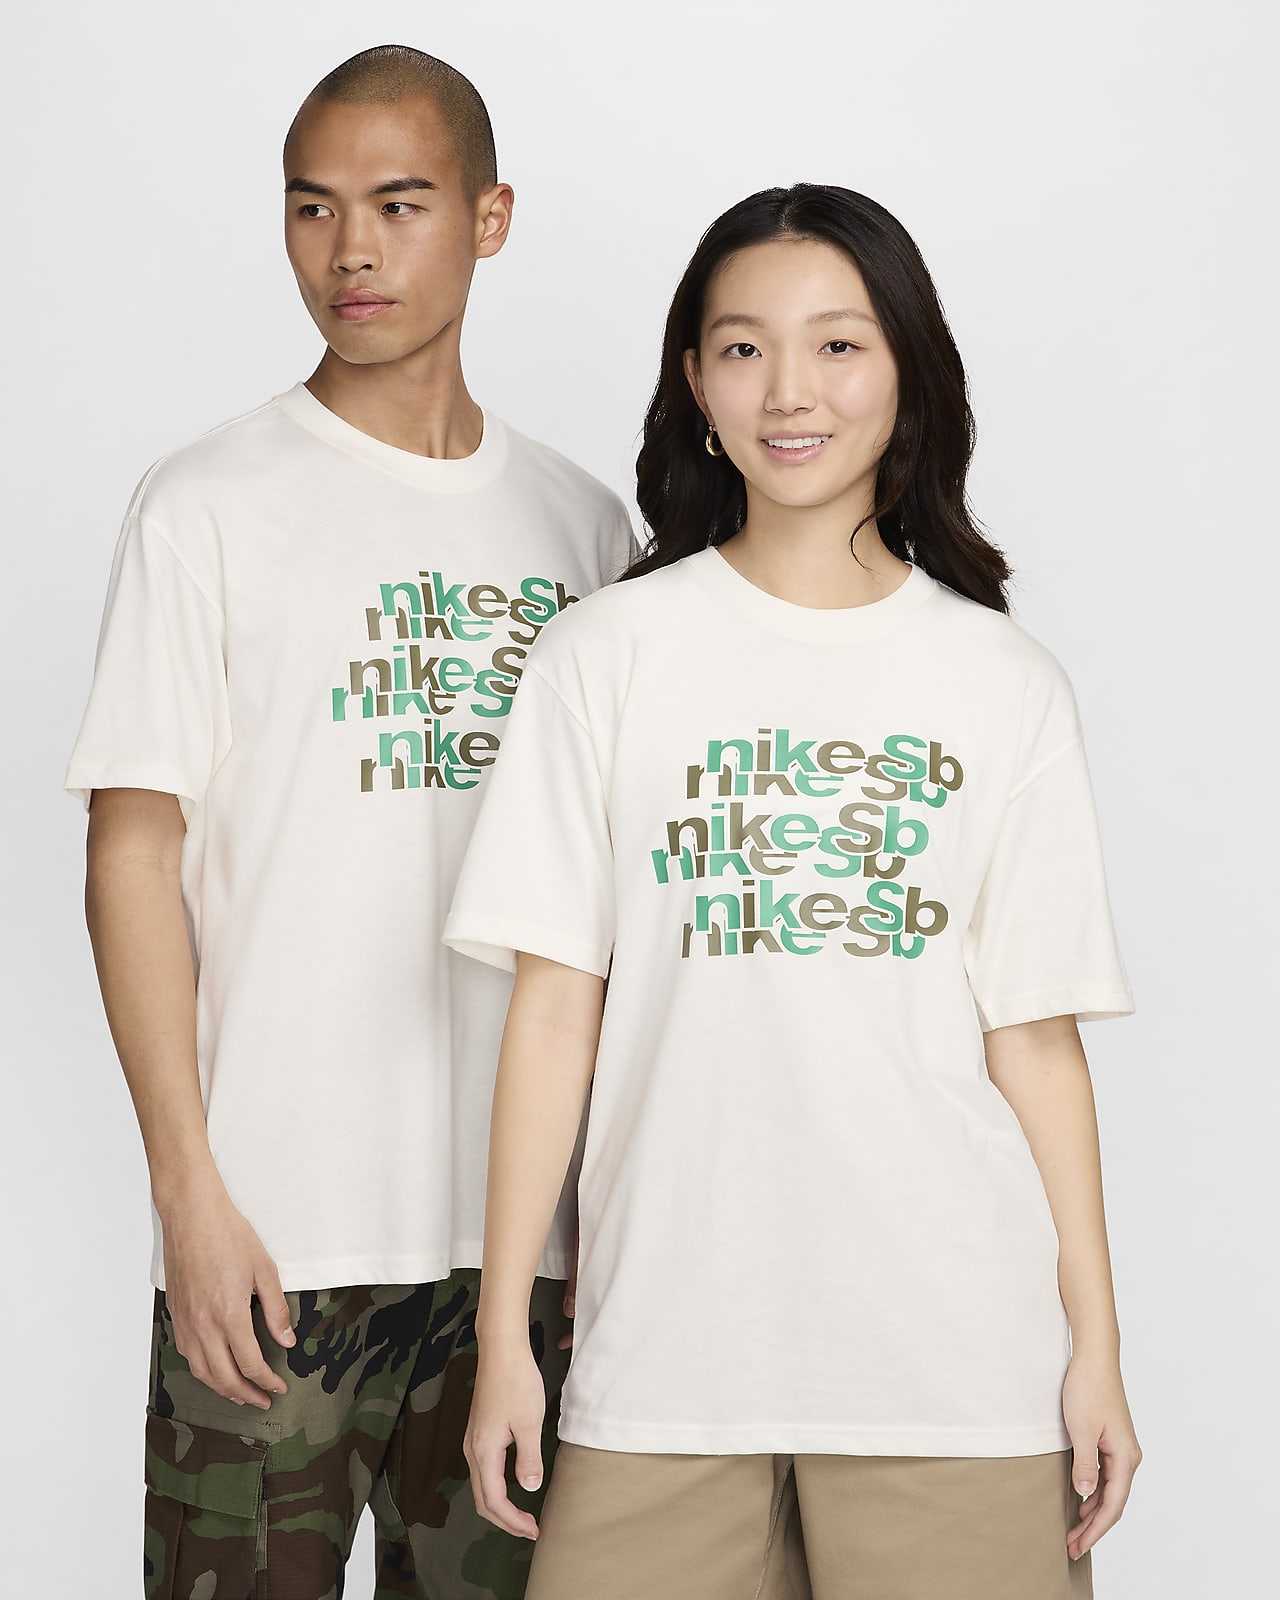 https://static.nike.com/a/images/t_PDP_1280_v1/f_auto,q_auto:eco/d7806fa7-30c9-4fae-bc88-8e1350589e4b/sb-skate-t-shirt-M7xjP2.png